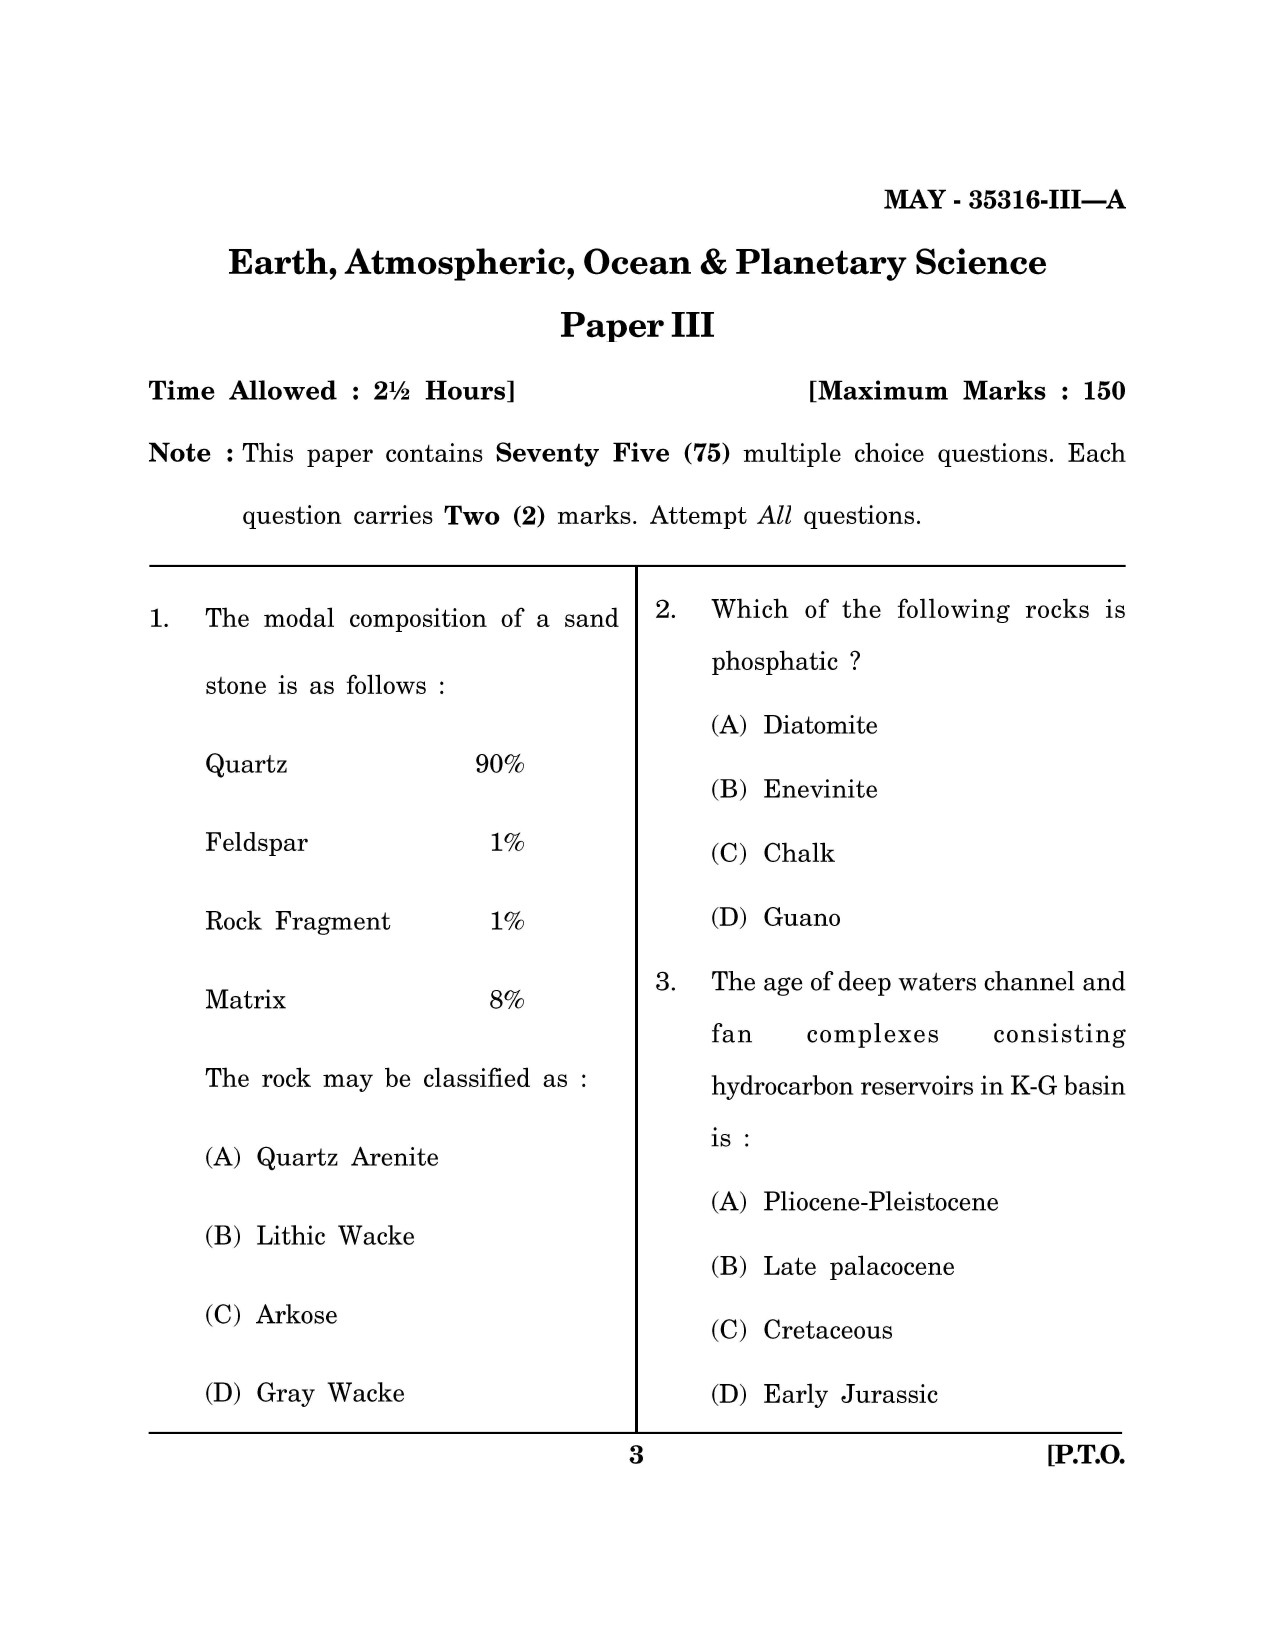 Maharashtra SET Earth Atmospheric Ocean Planetary Science Question Paper III May 2016 2